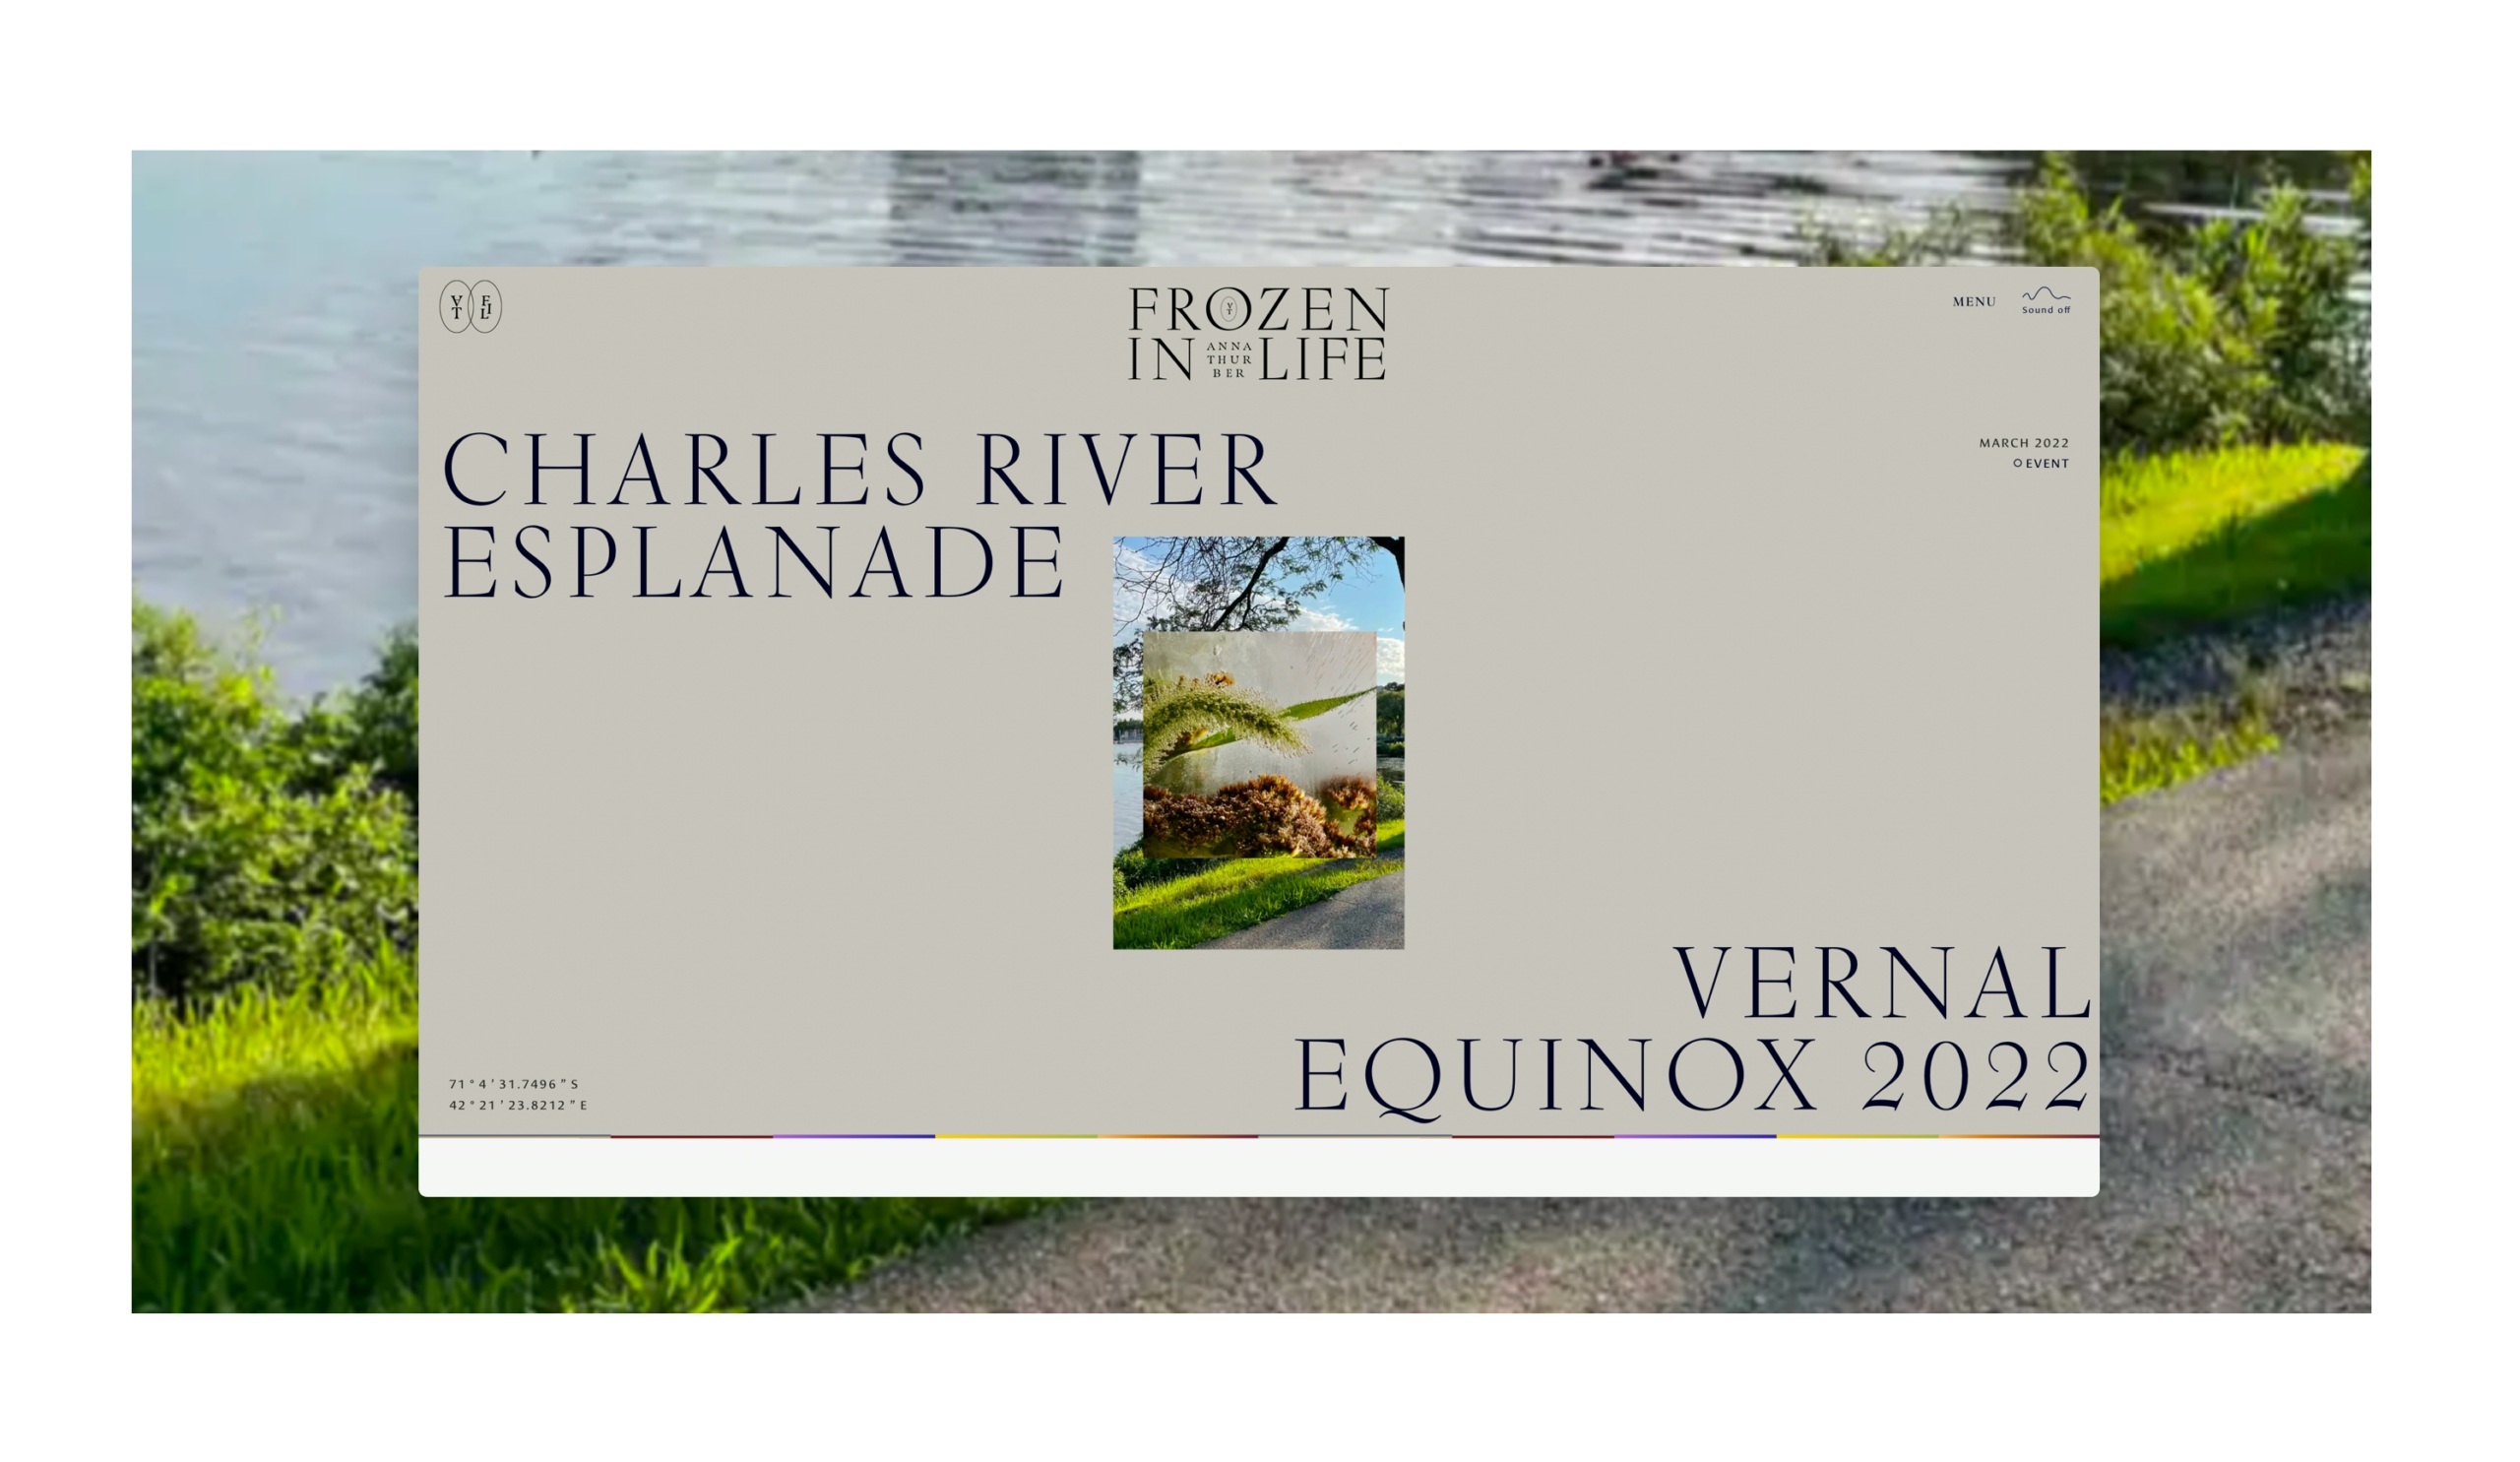 An advert for “Frozen in Life” by “Anna Thurber” at Charles River Esplanade at Vernal Equinox 2022. Anna’s art is featured in the centre.